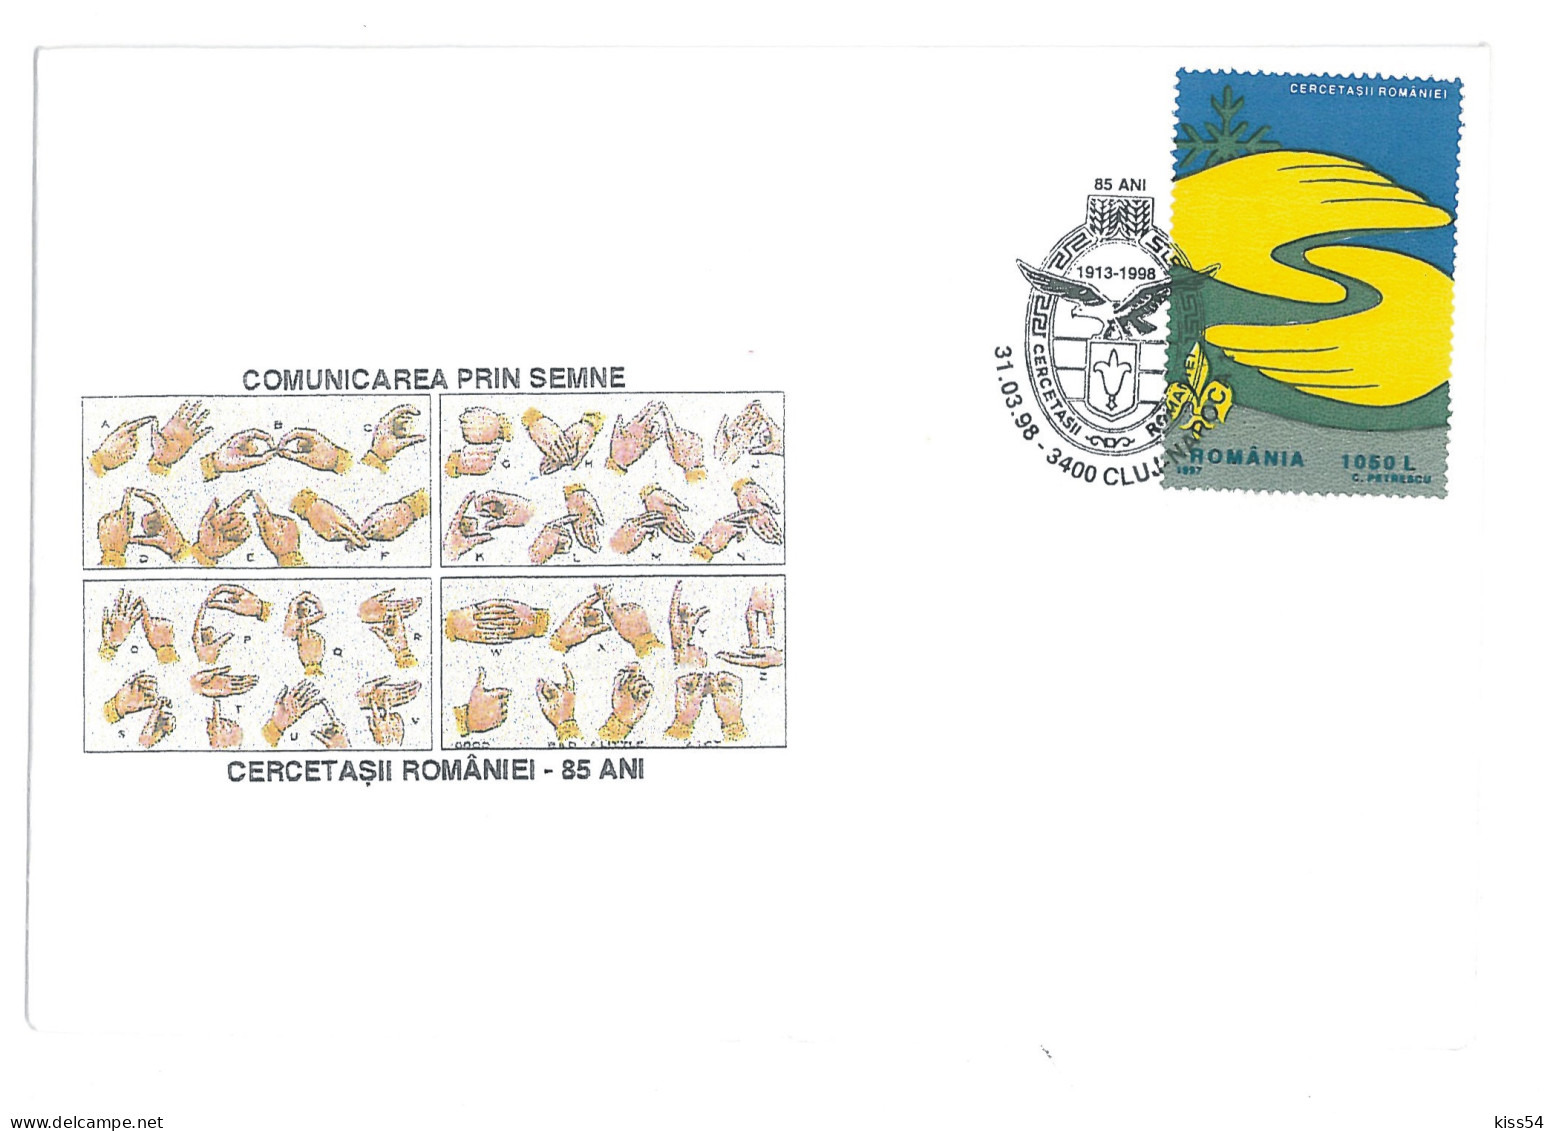 SC 59 - 1213 Scout ROMANIA, Special Stamp - Cover - Used - 1998 - Storia Postale